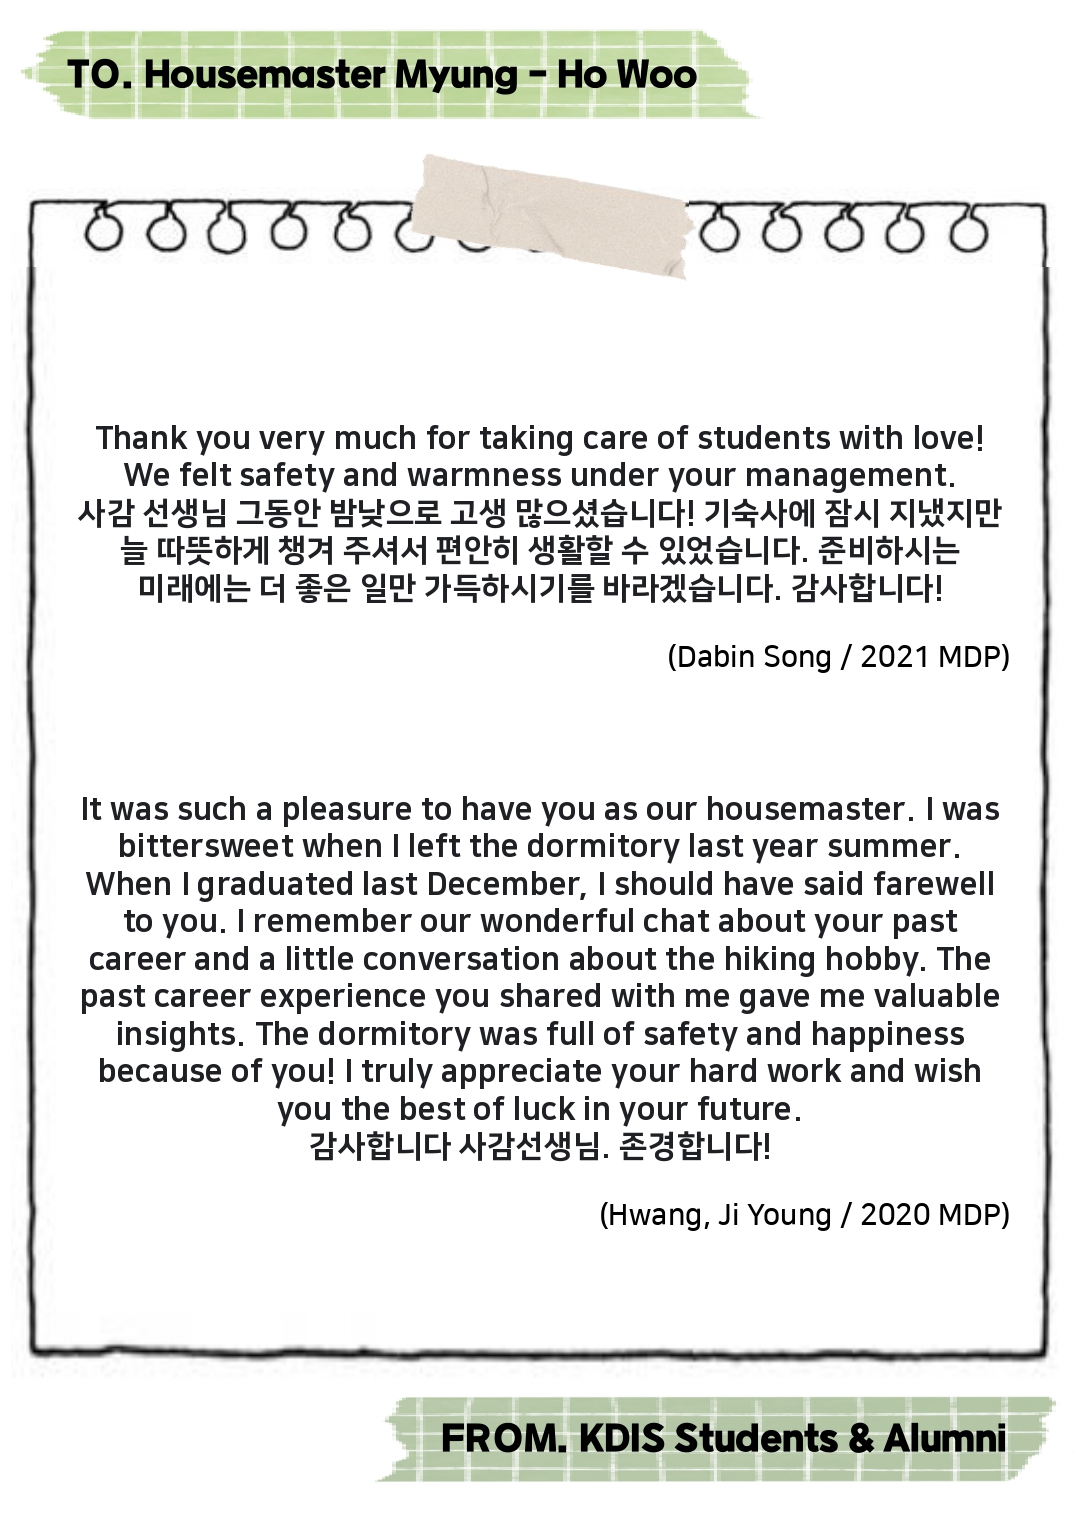 Thank you Housemaster Myung-ho Woo -Messages from KDIS Students and Alumni 사진3